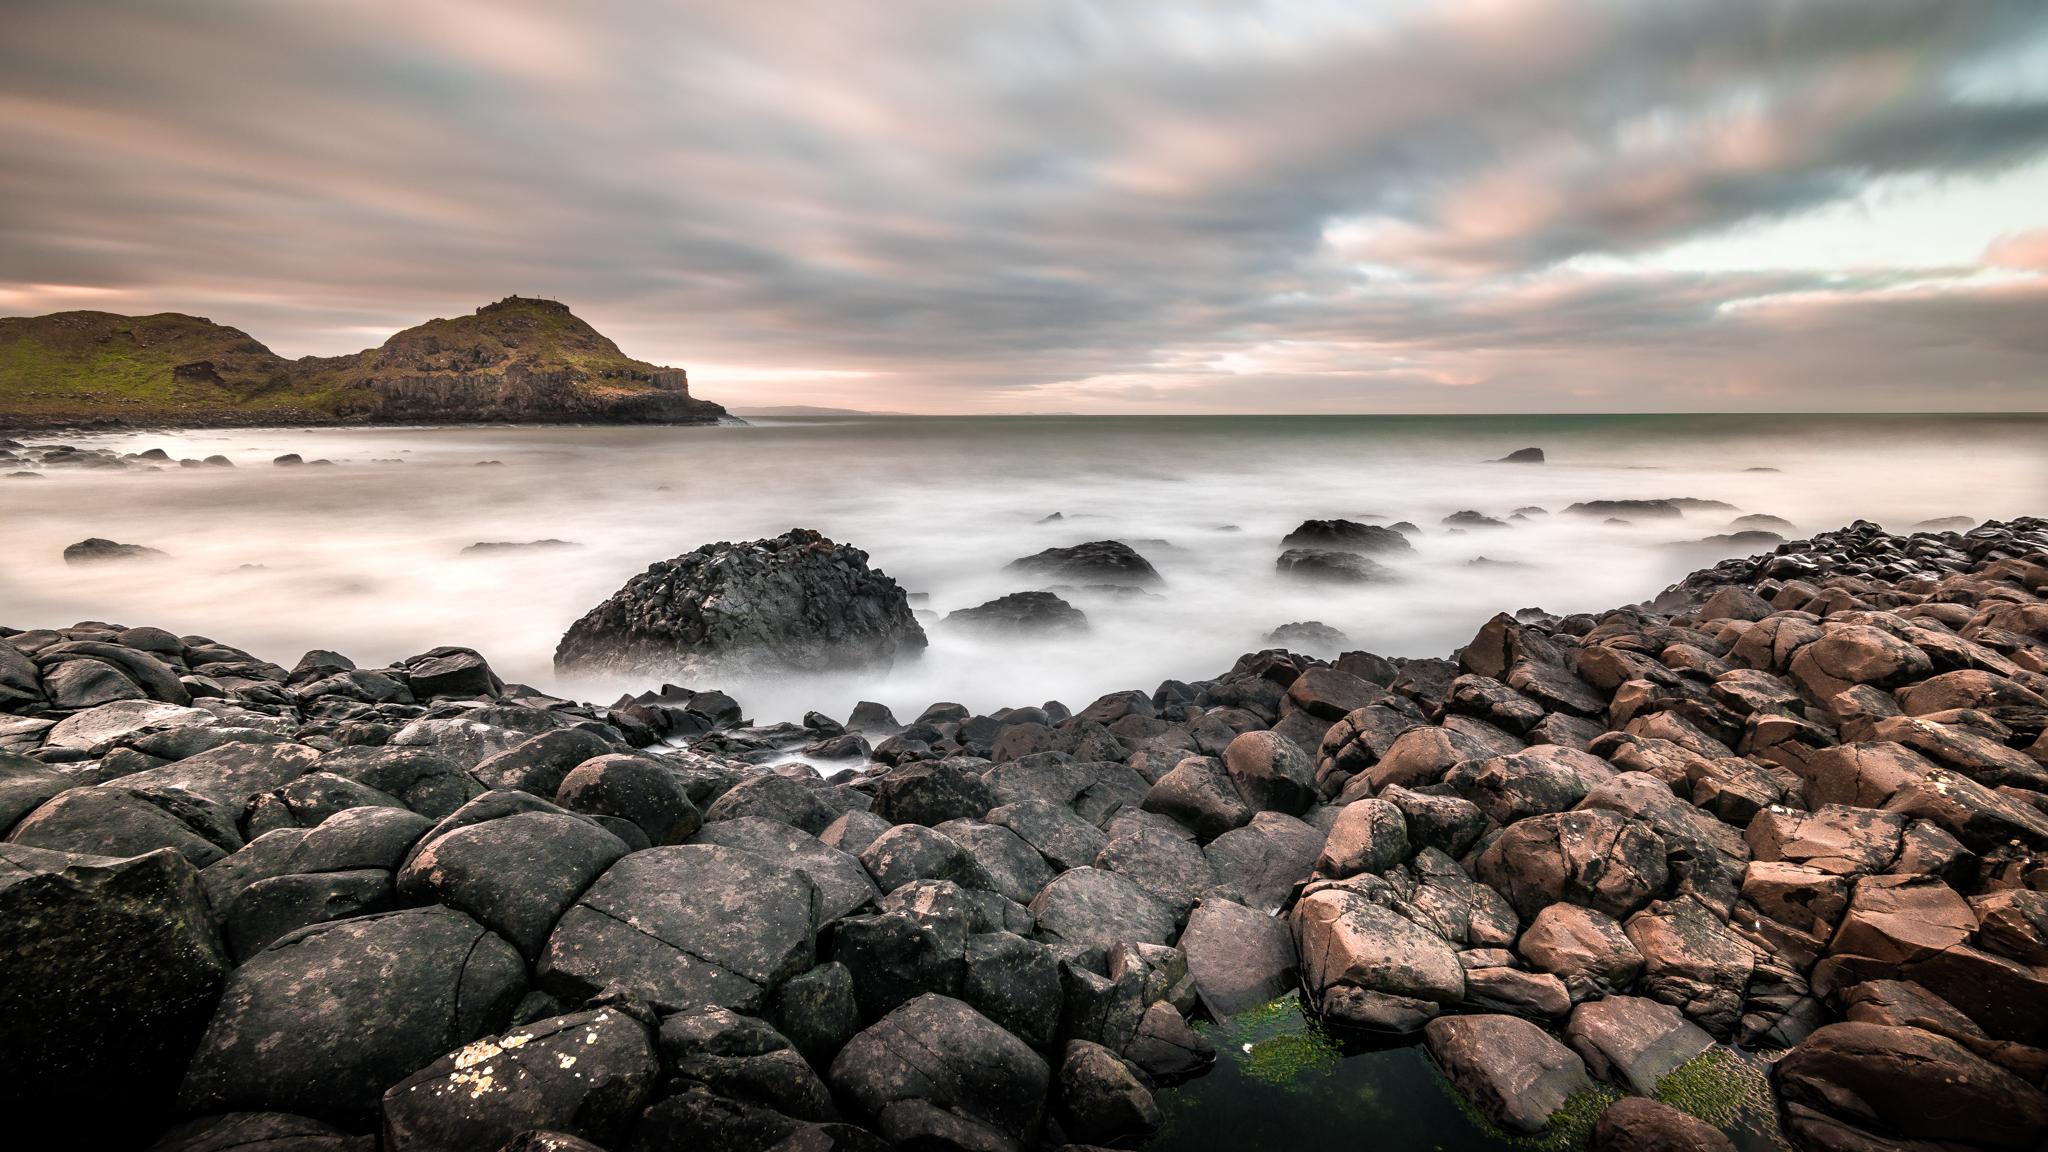 A photograph of the Giant's Causeway in Northern Ireland